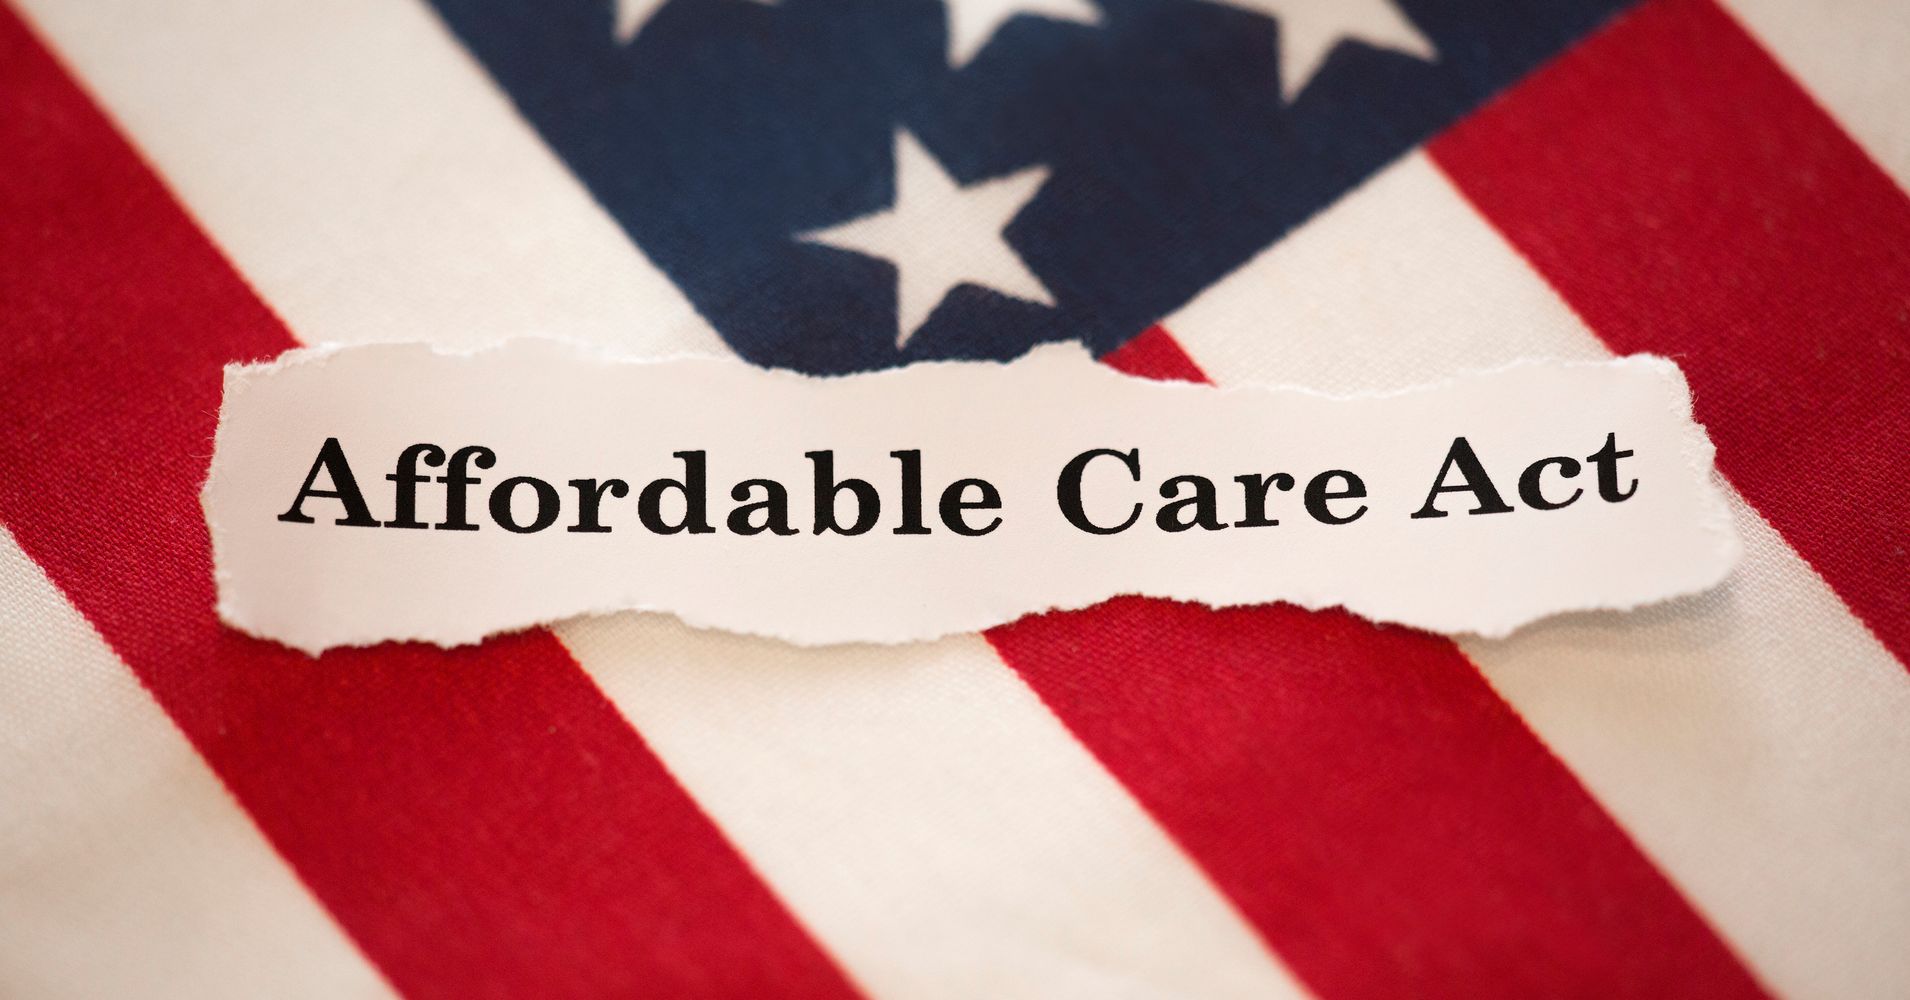 Continuing The Progress Of The Affordable Care Act Guiding Principles To Ensure Value Based